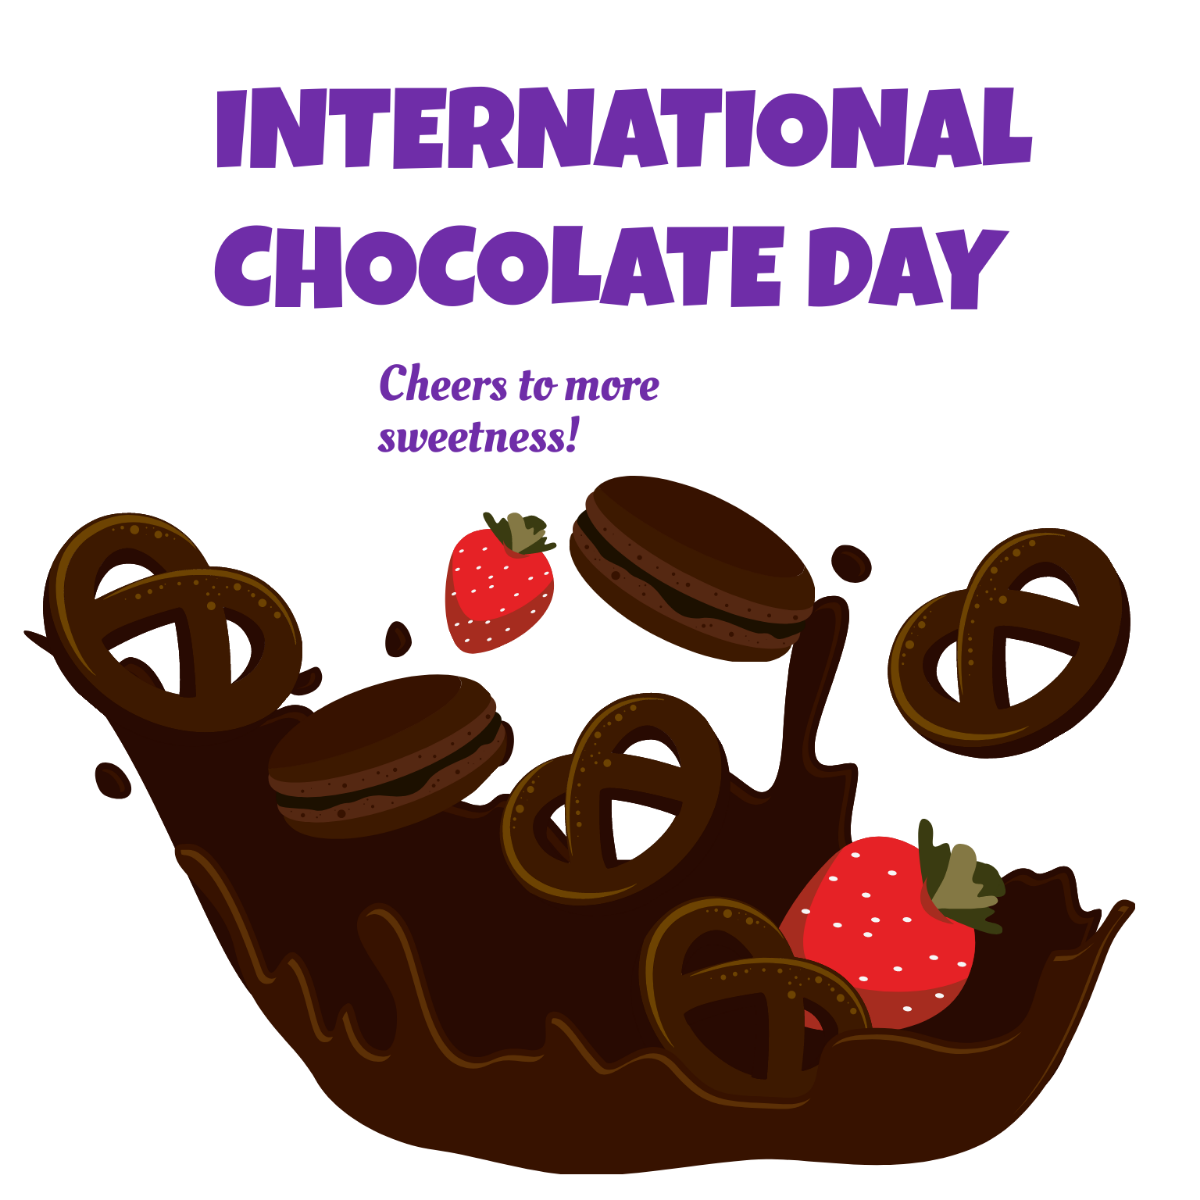 International Chocolate Day Poster Vector